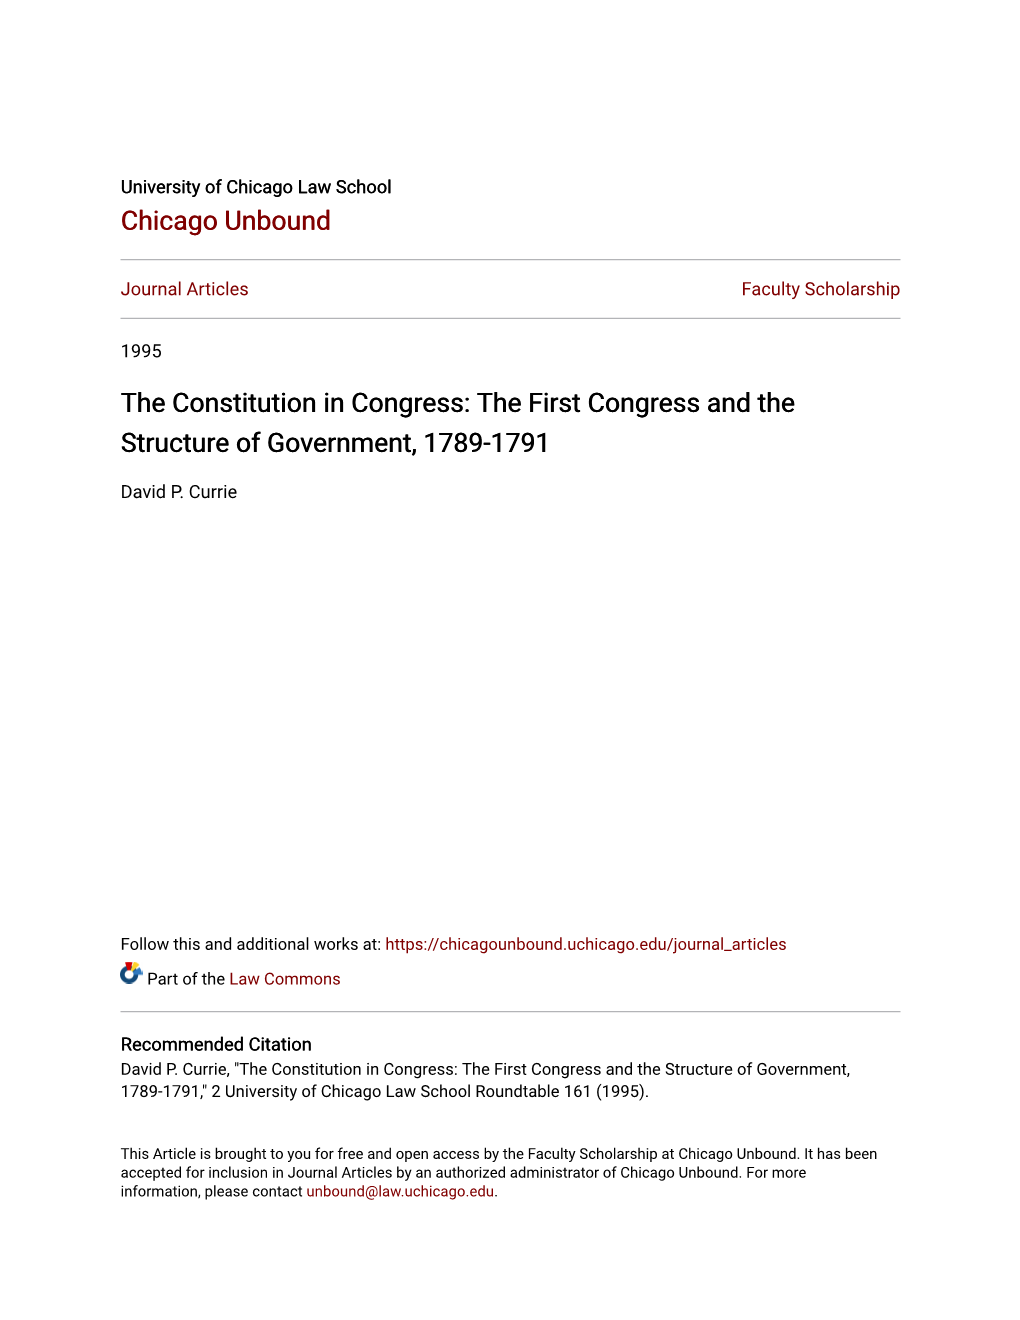 The Constitution in Congress: the First Congress and the Structure of Government, 1789-1791